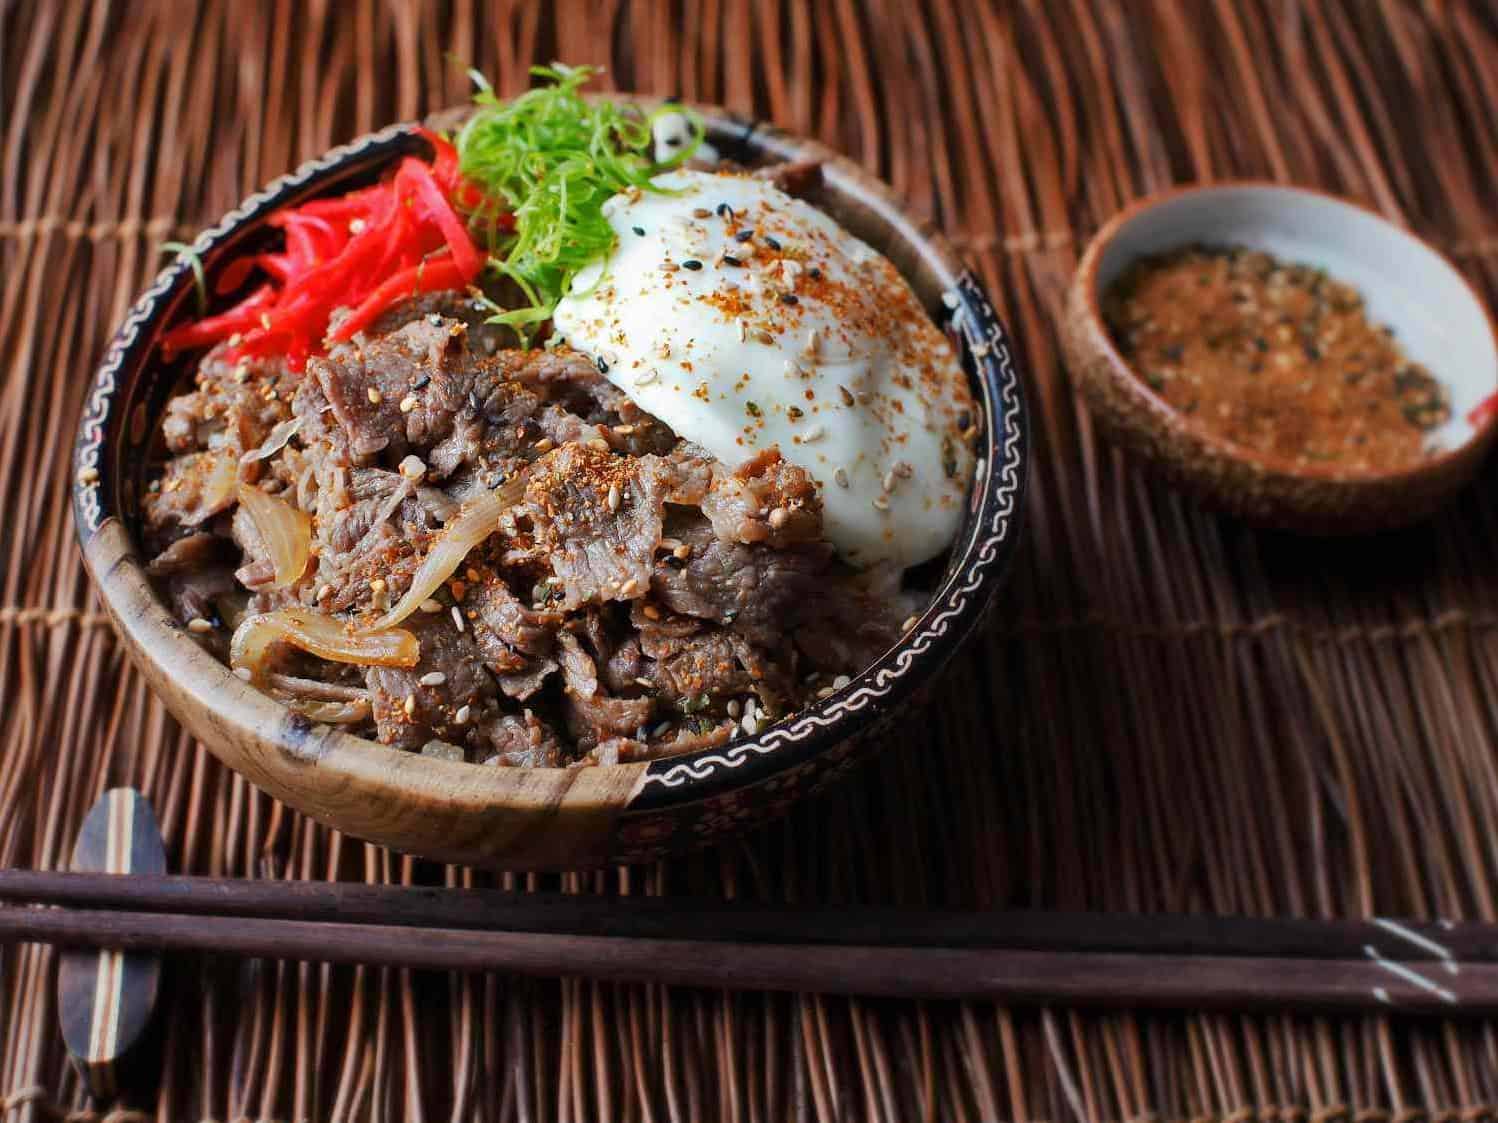  The combination of tender beef, fluffy rice, and savory sauce is a match made in heaven.